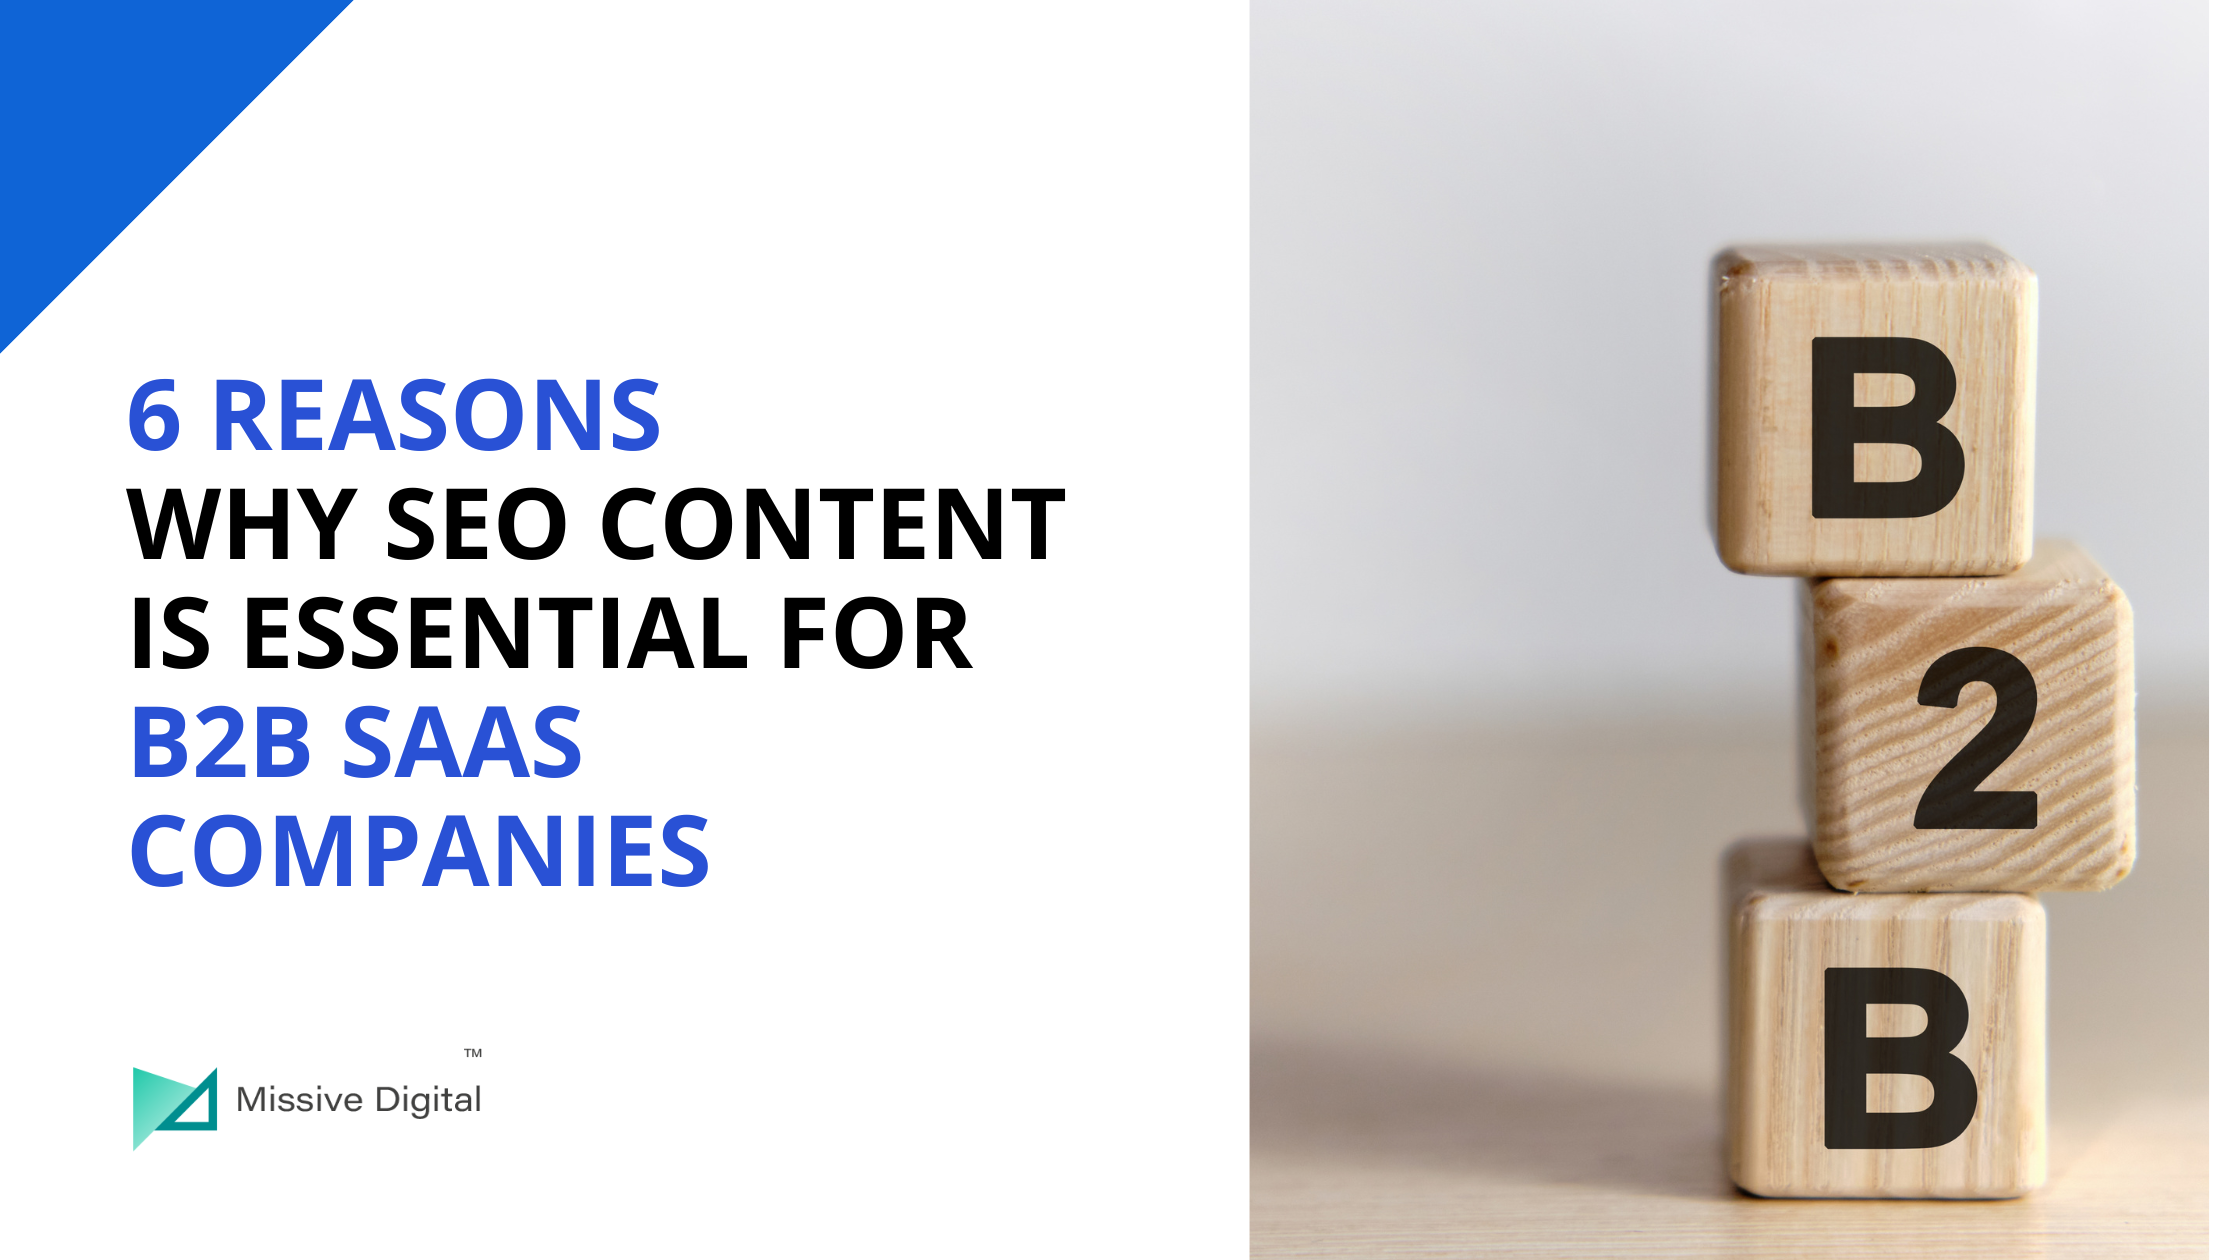 6 Reasons Why SEO Content is Essential for B2B SaaS Companies